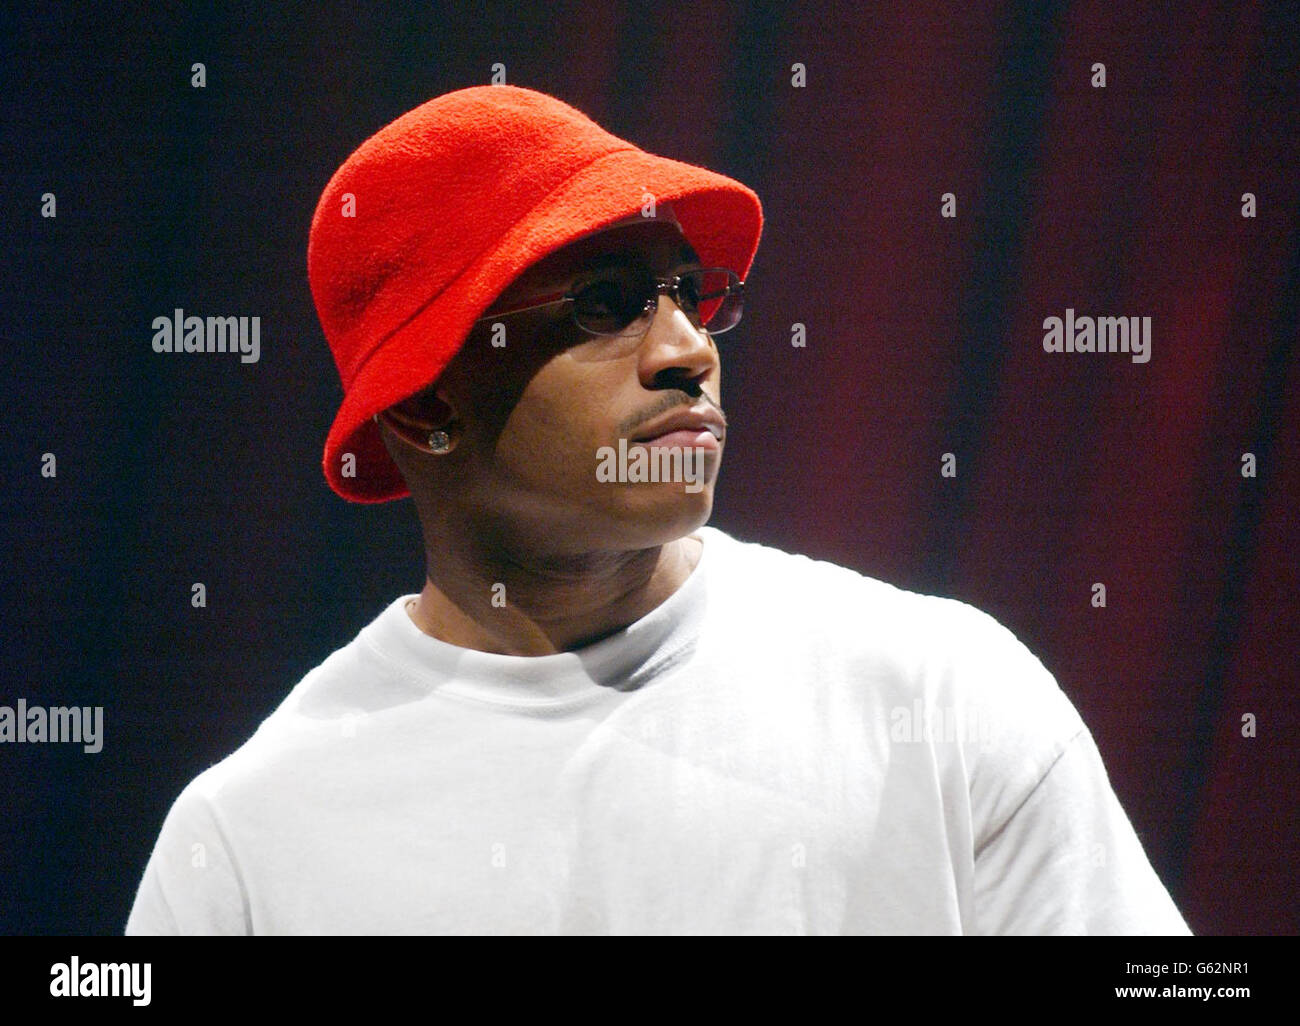 LL Cool J during rehearsals for the 2002 MOBO (Music of Black Origin) Awards, which take place at the London Arena in London's Docklands. Stock Photo